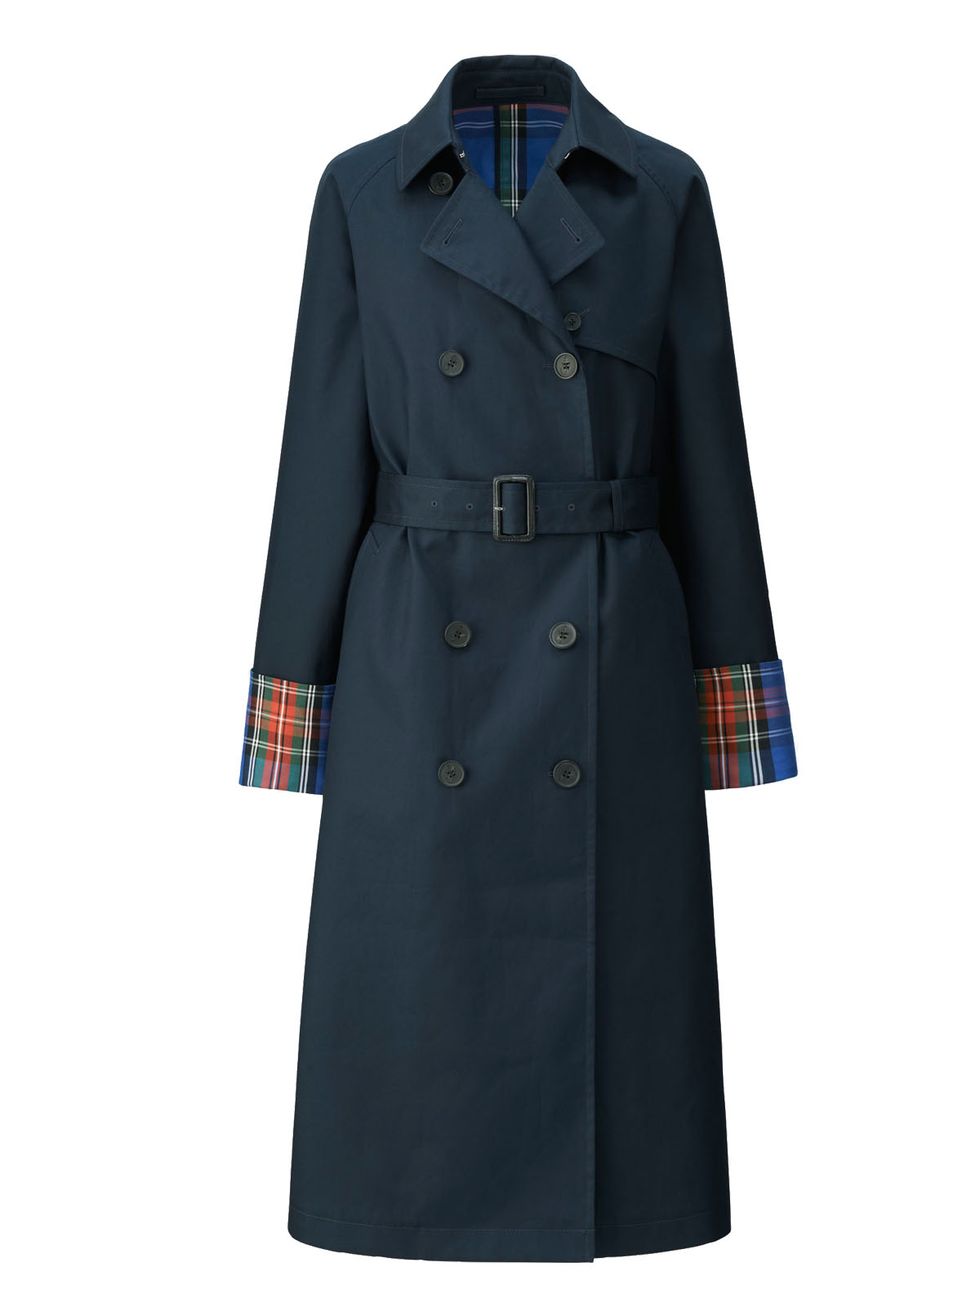 Clothing, Coat, Trench coat, Outerwear, Overcoat, Sleeve, Collar, Dress, Jacket, Duster, 